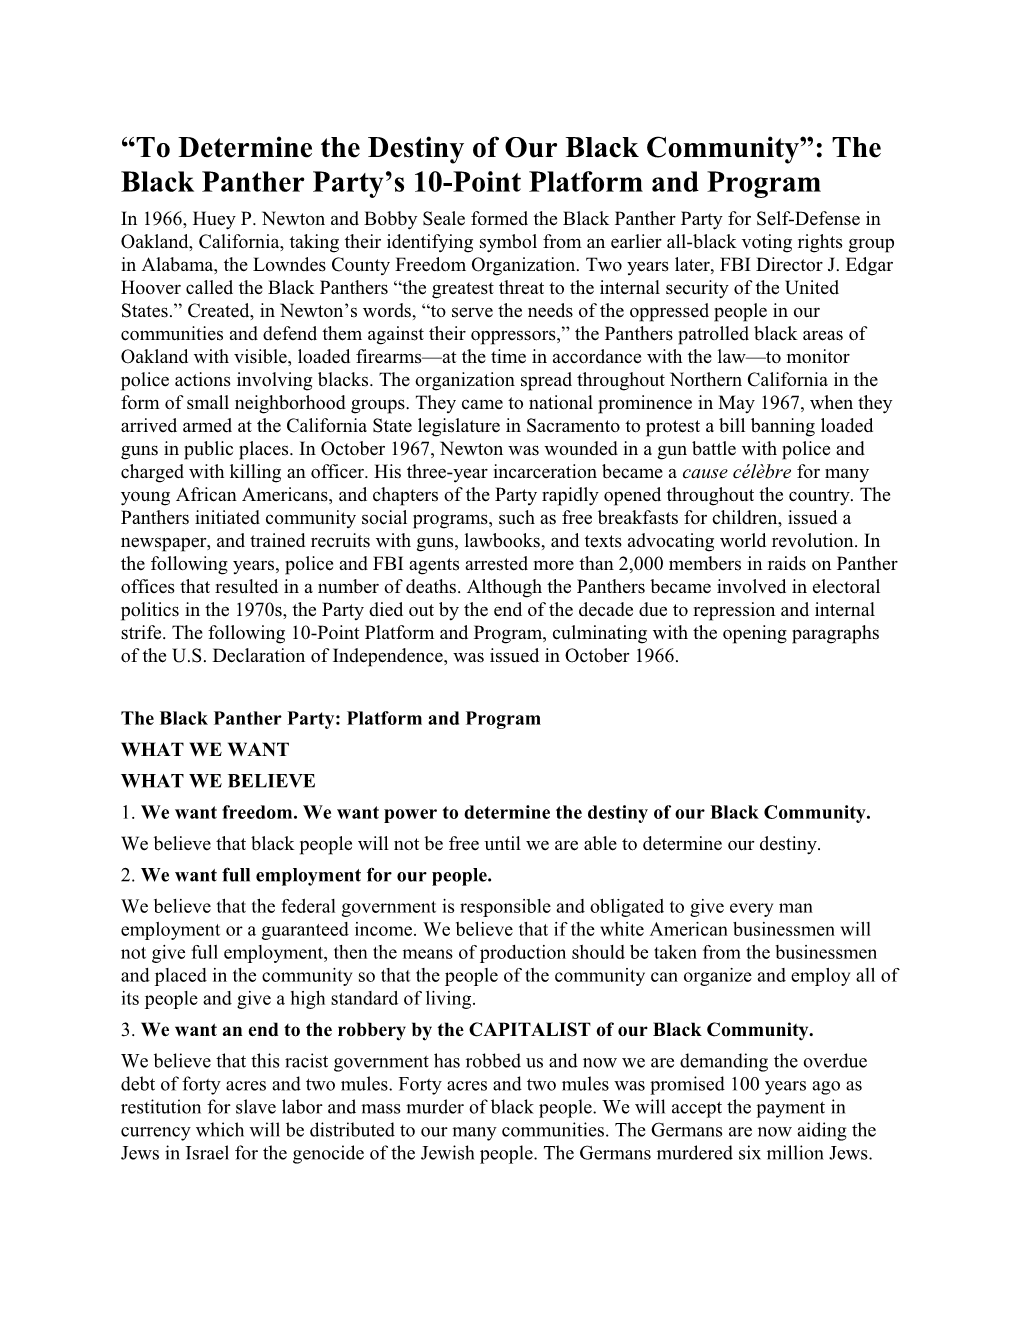 The Black Panther Party: Platform and Program